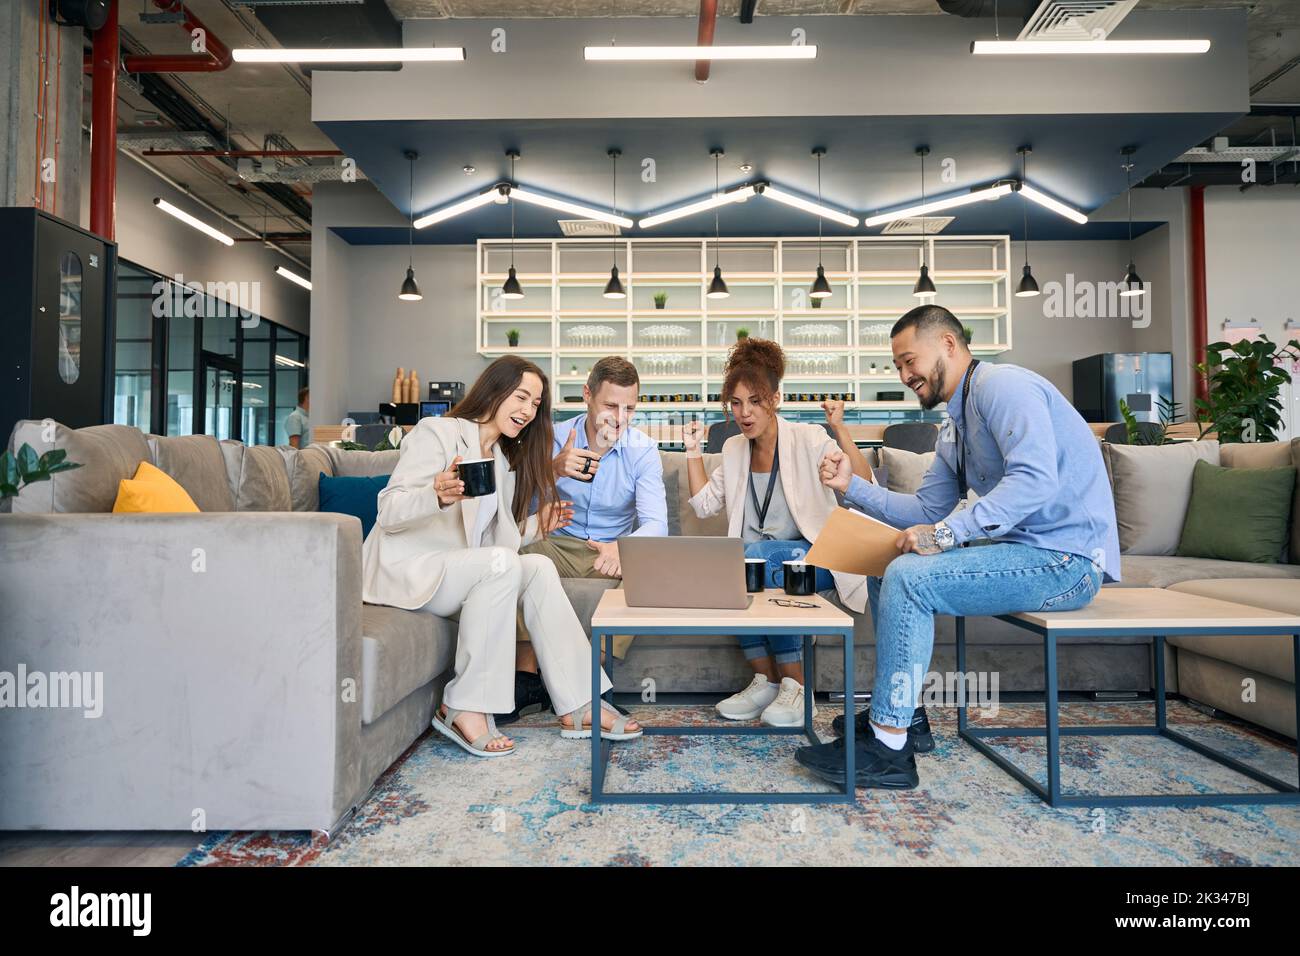 Entrepreneurs entertaining themselves during coffee break in co-working space Stock Photo